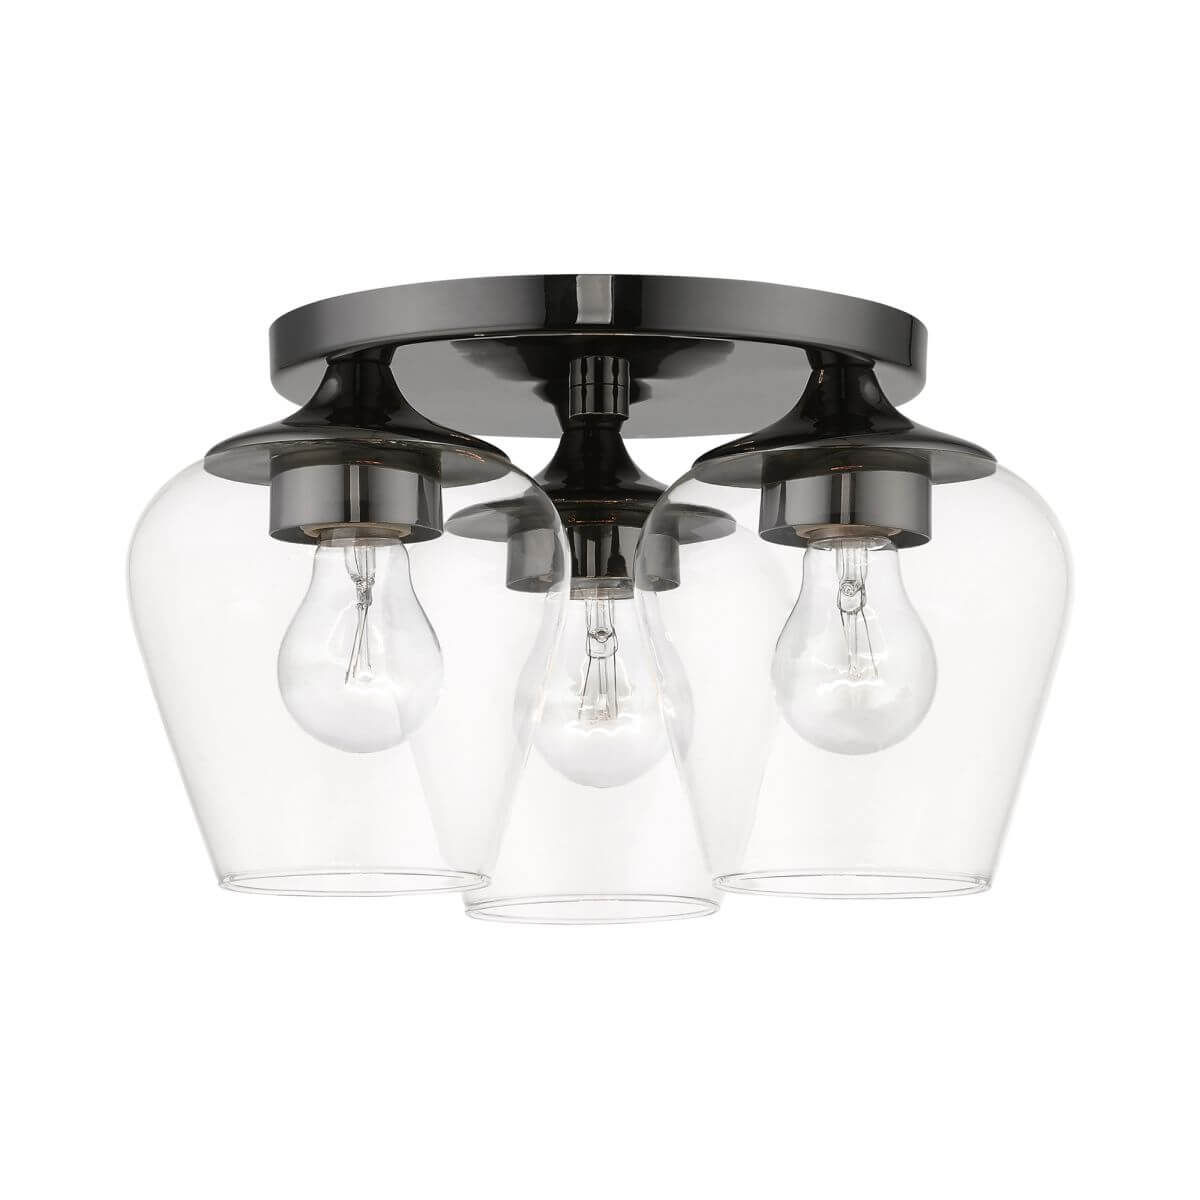 Livex 46723-46 Willow 3 Light 13 inch Flush Mount in Black Chrome with Clear Glass